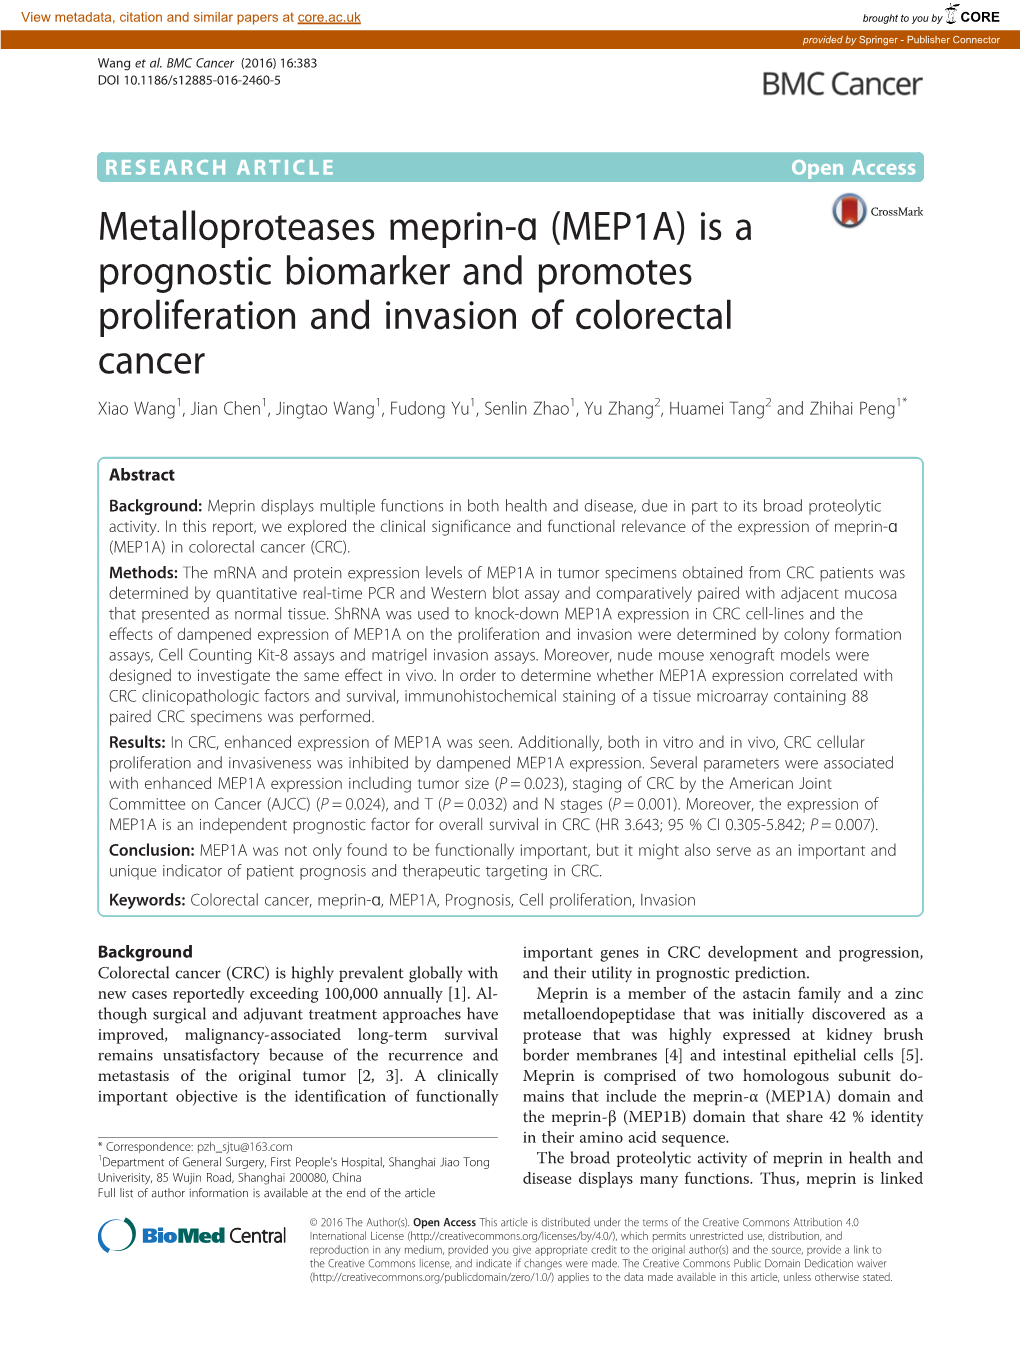 Metalloproteases Meprin-Ɑ (MEP1A) Is a Prognostic Biomarker And